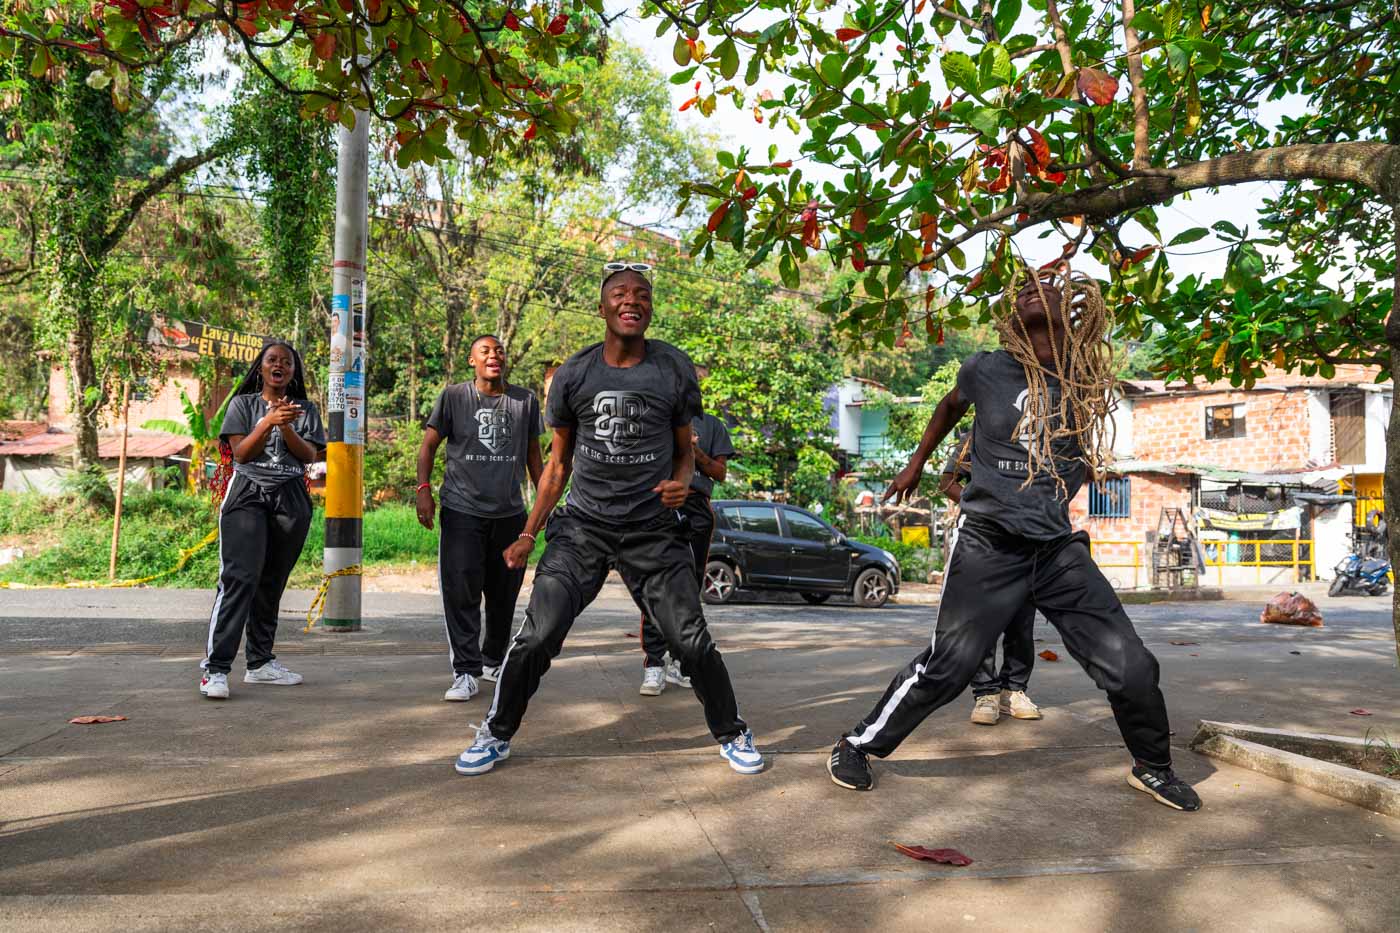 A local Afro-Caribbean dance troupe dancing together under a tree.